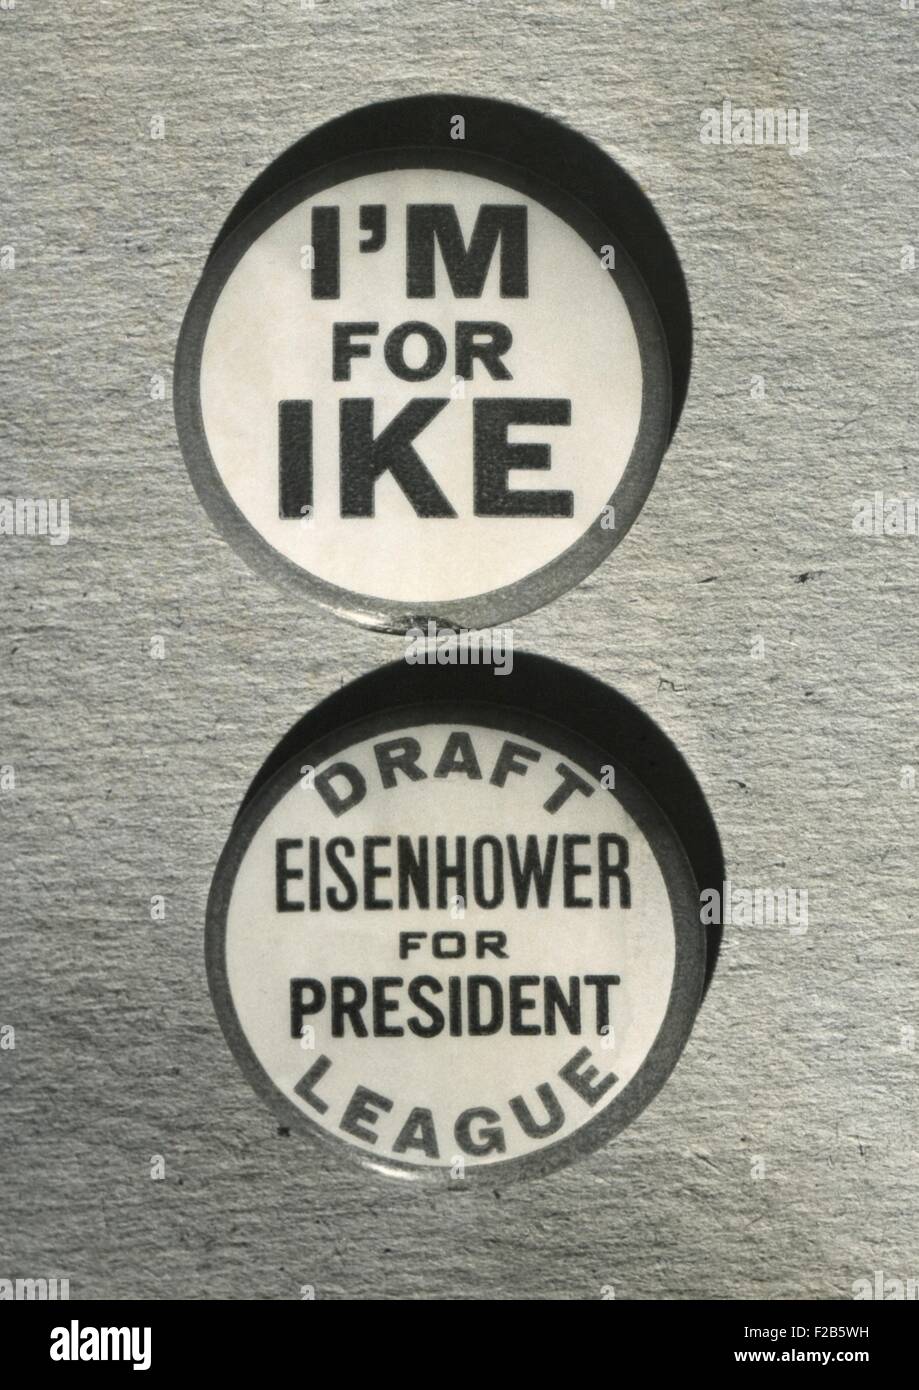 1948 Campaign Buttons of the 'Draft Eisenhower for President League'. Oct. 16, 1948. - (BSLOC 2014 16 3) Stock Photo